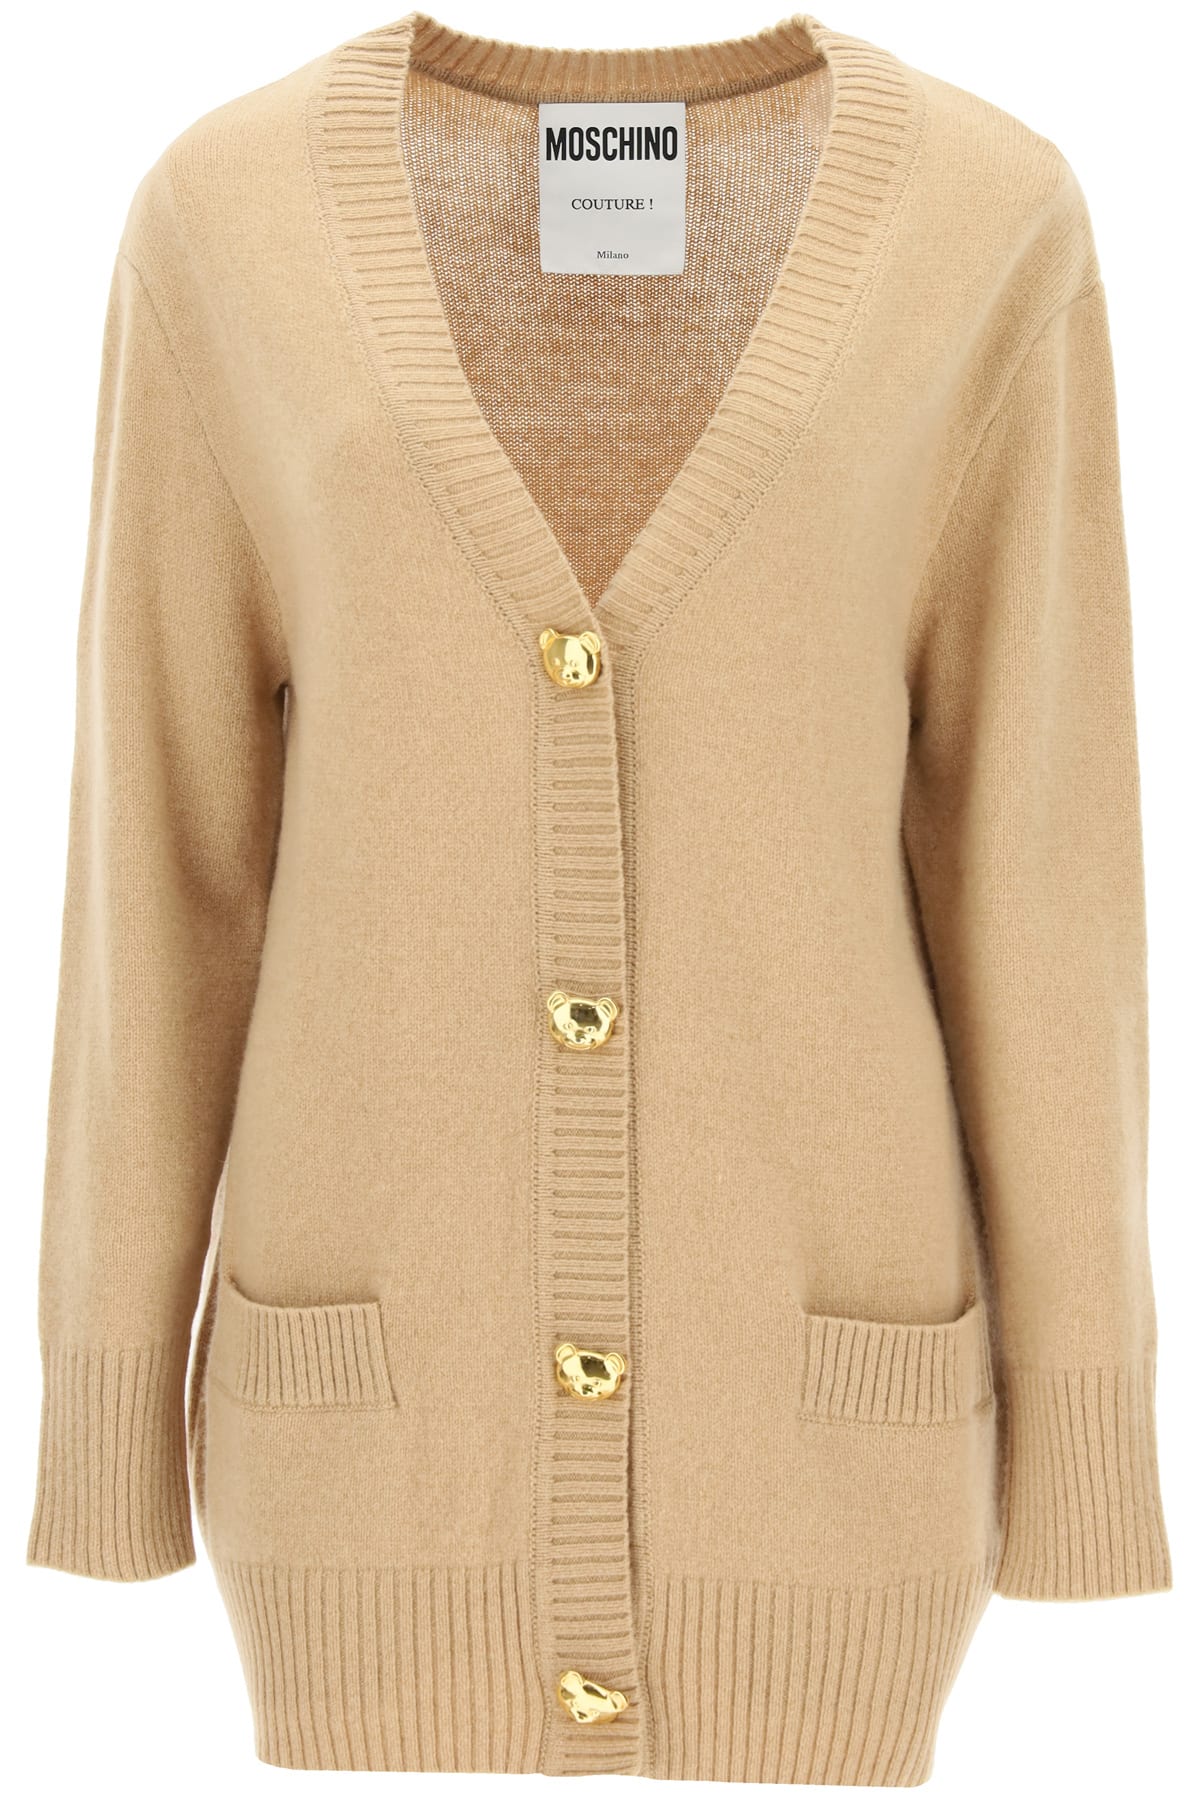 Moschino Oversized Cardigan With Teddy Bear Buttons